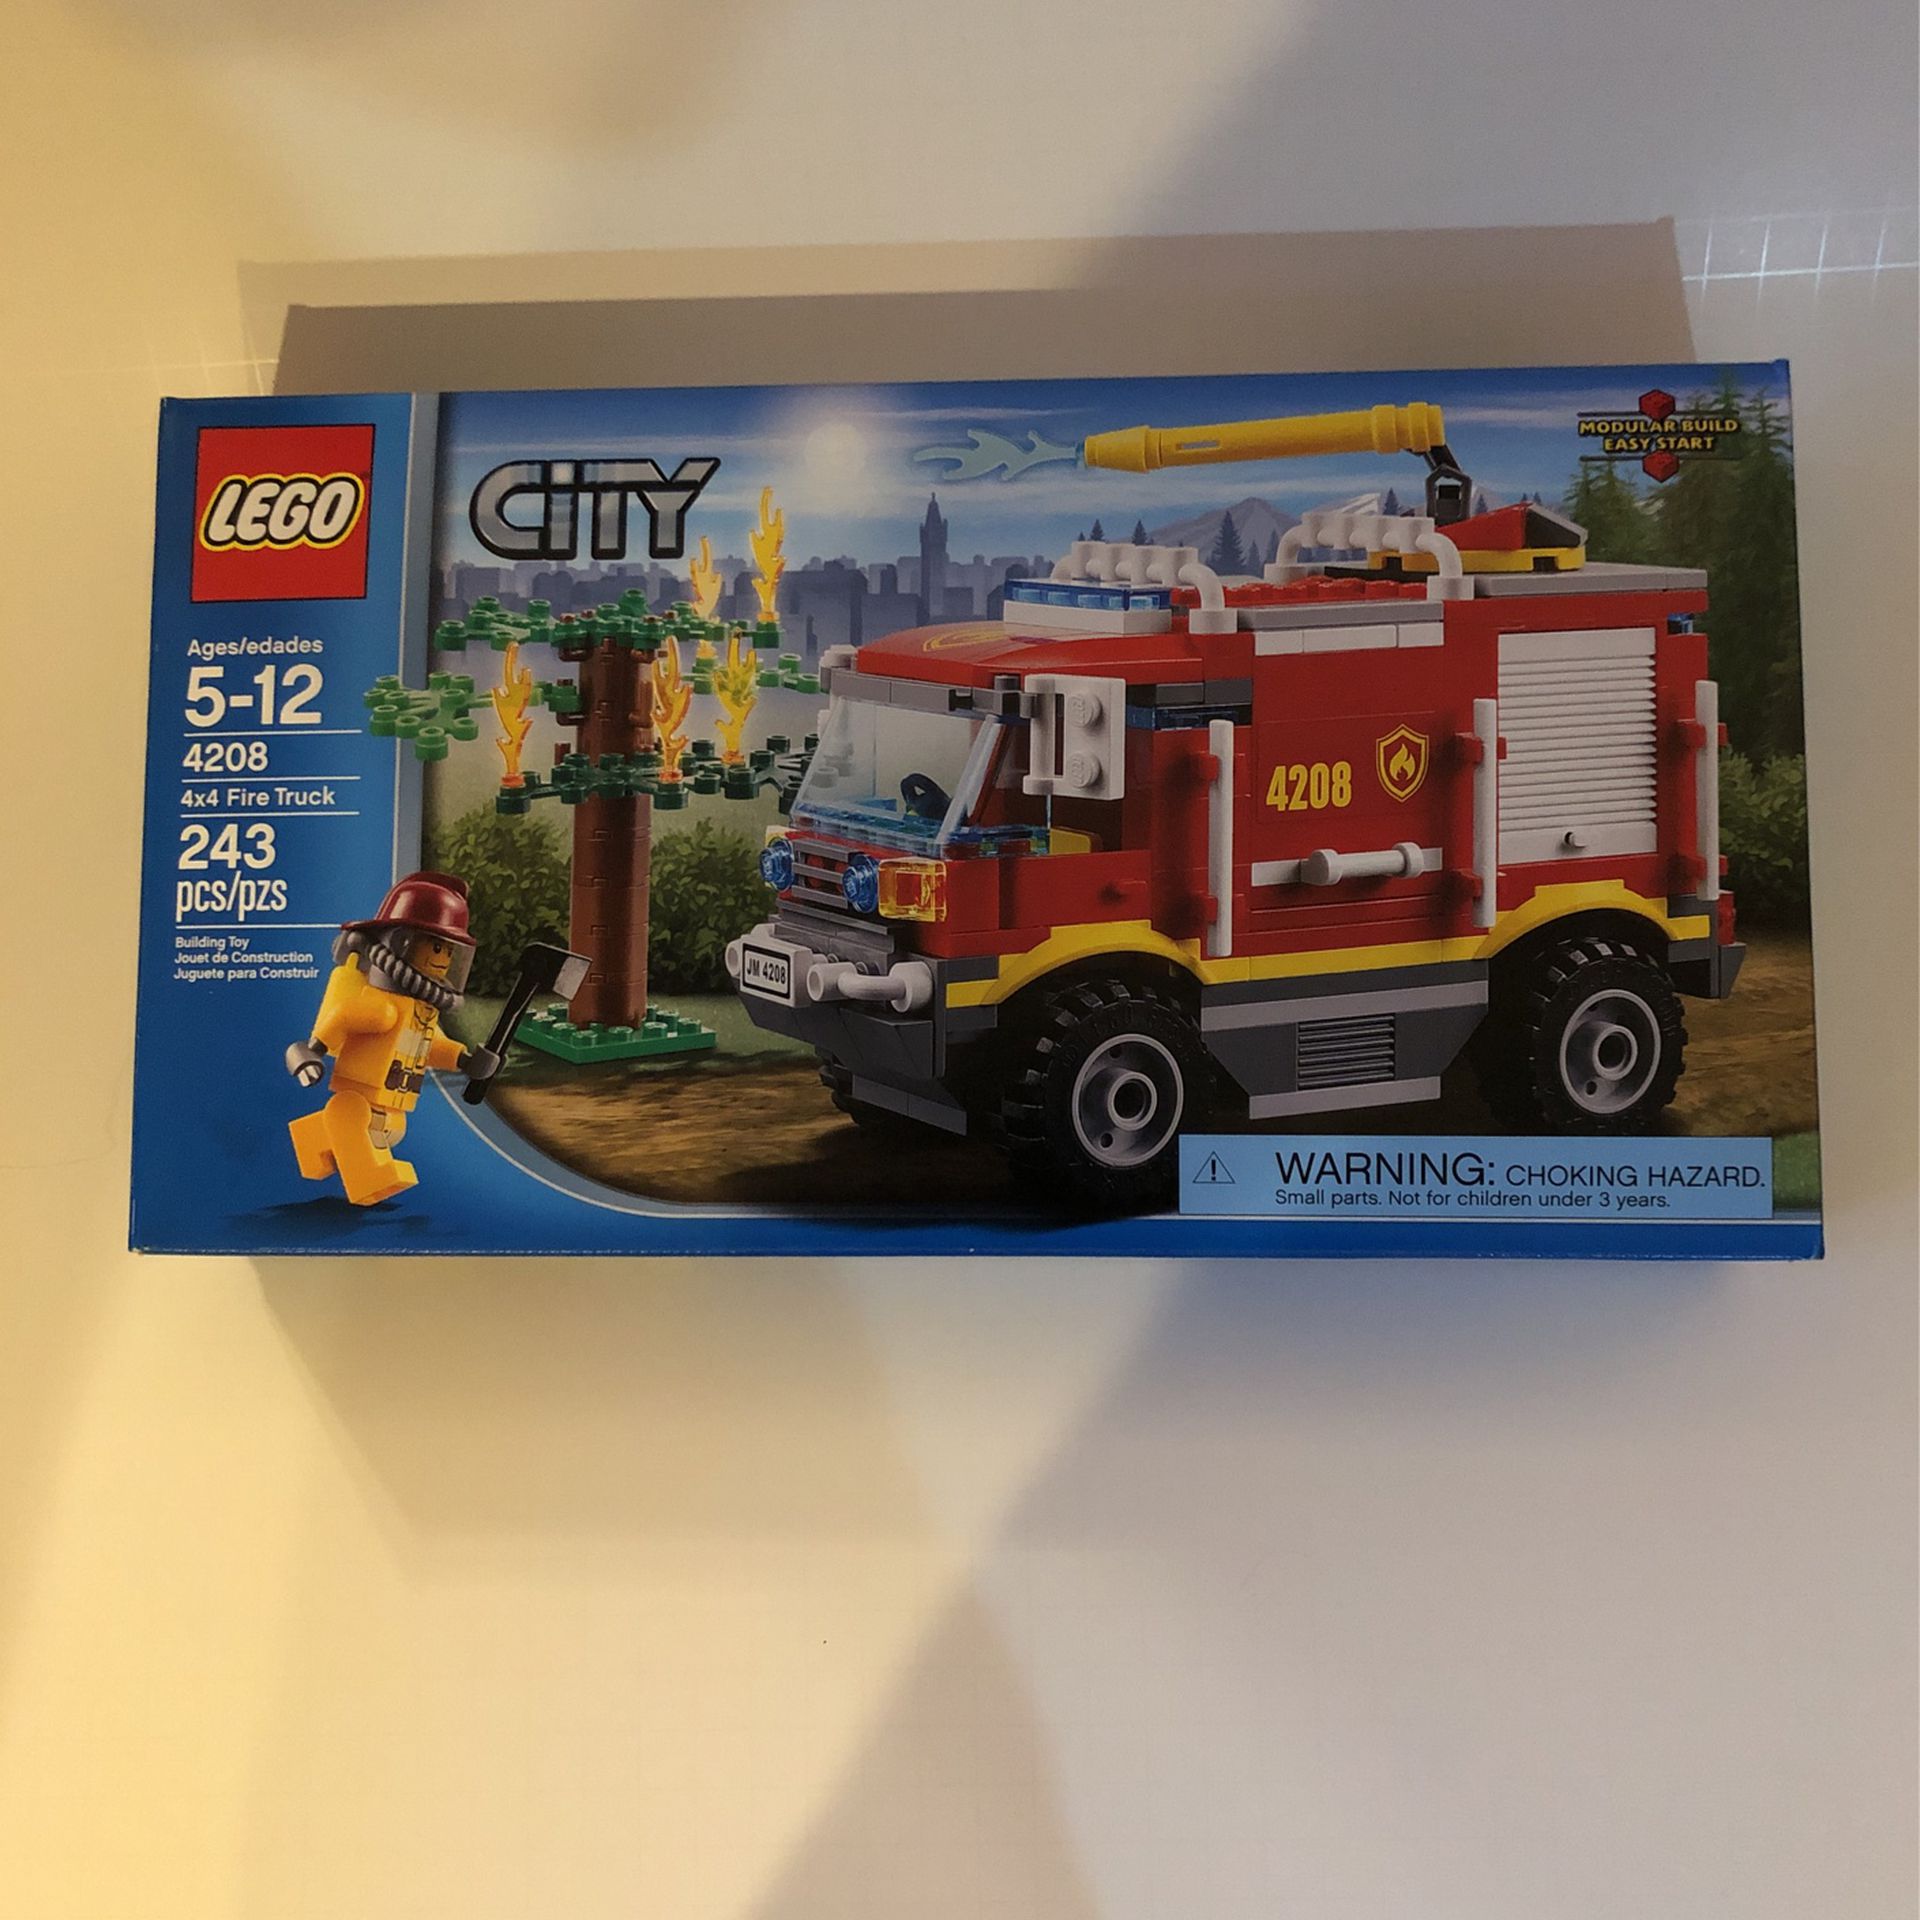 Hare røg Begrænse Lego City 4x4 Fire Truck 4208 for Sale in Federal Way, WA - OfferUp